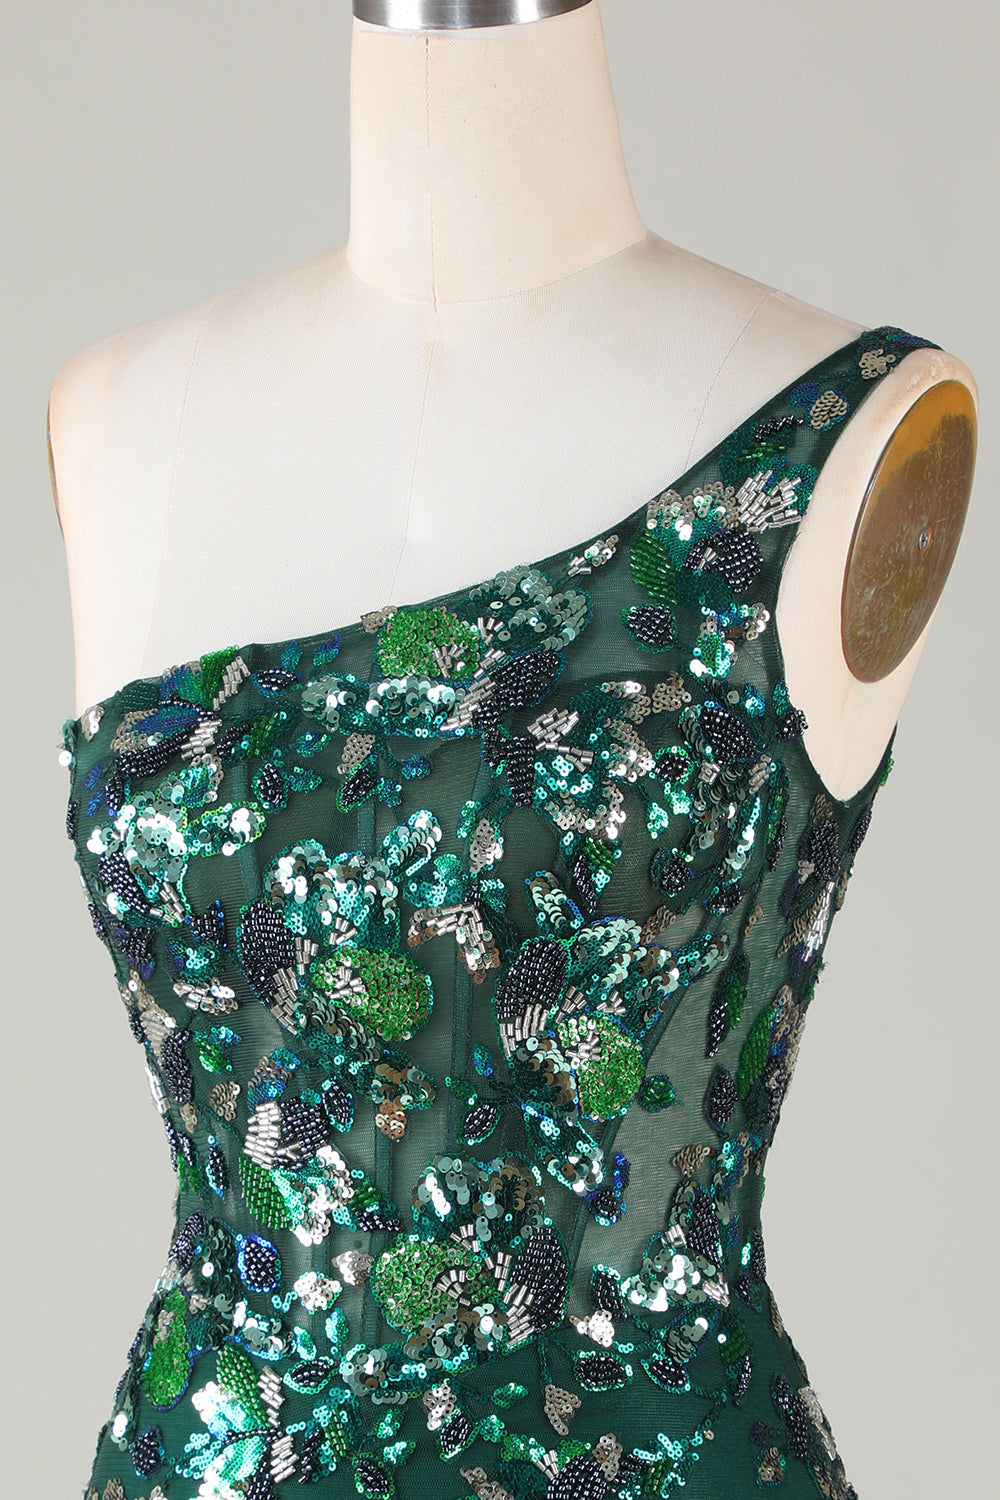 Bodycon One Shoulder Dark Green Sequins Short Homecoming Dress with Feather